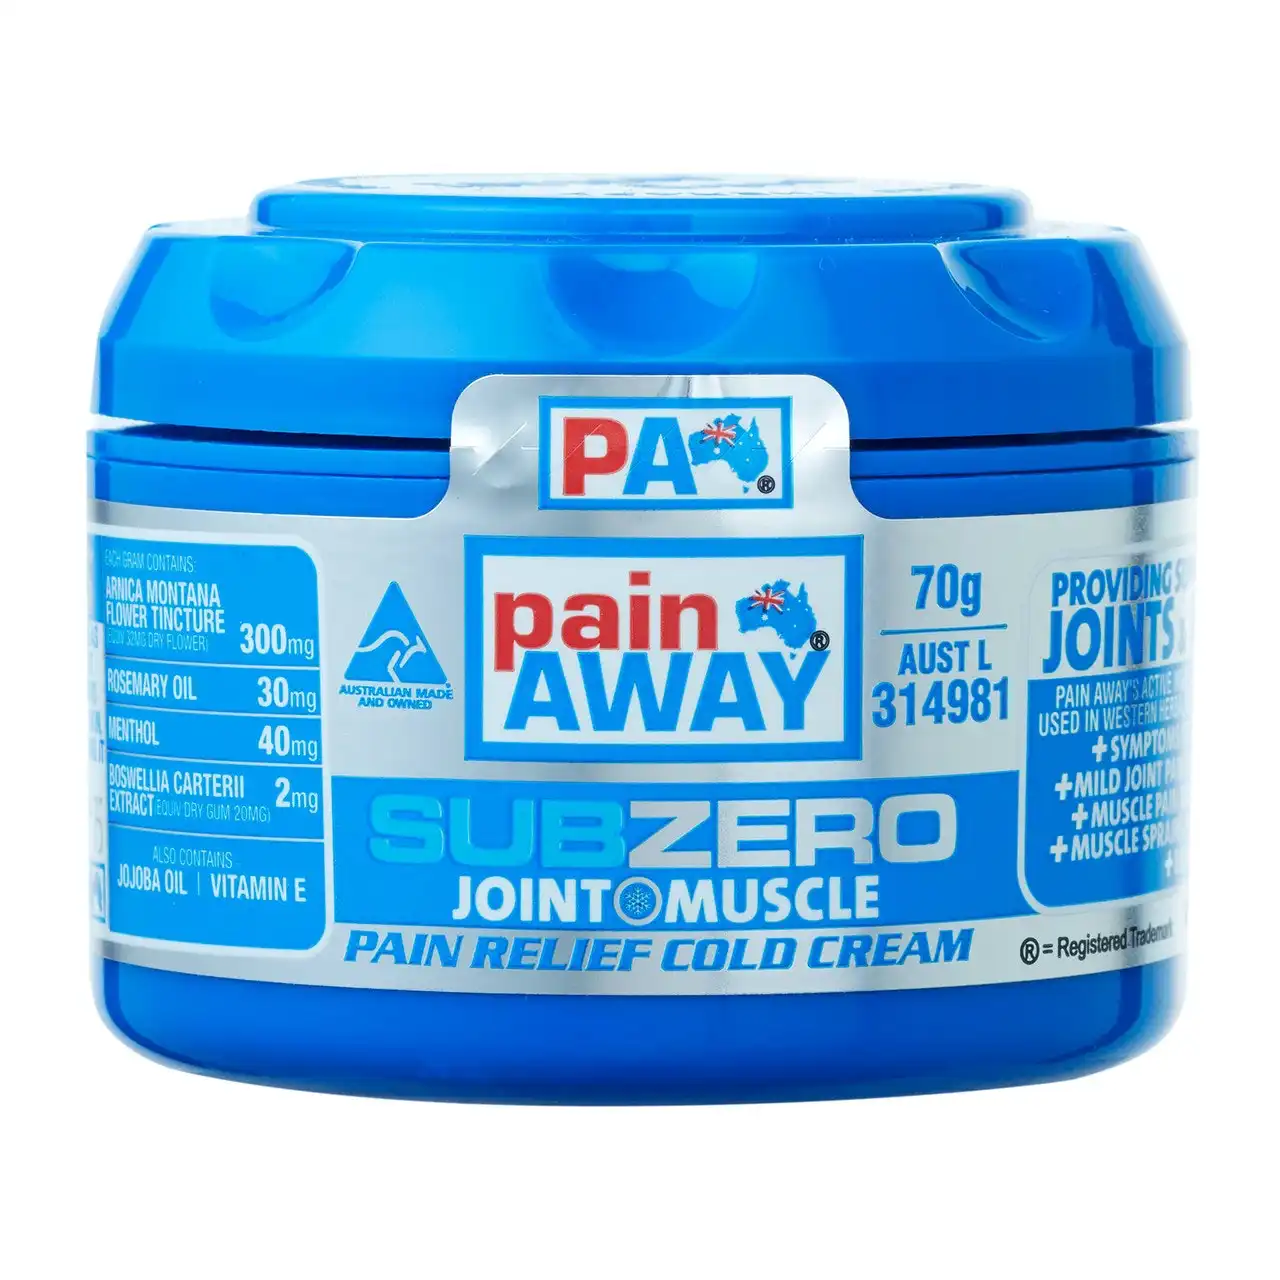 Pain Away Subzero Joint Muscle Pain Relief Cold Cream 70g